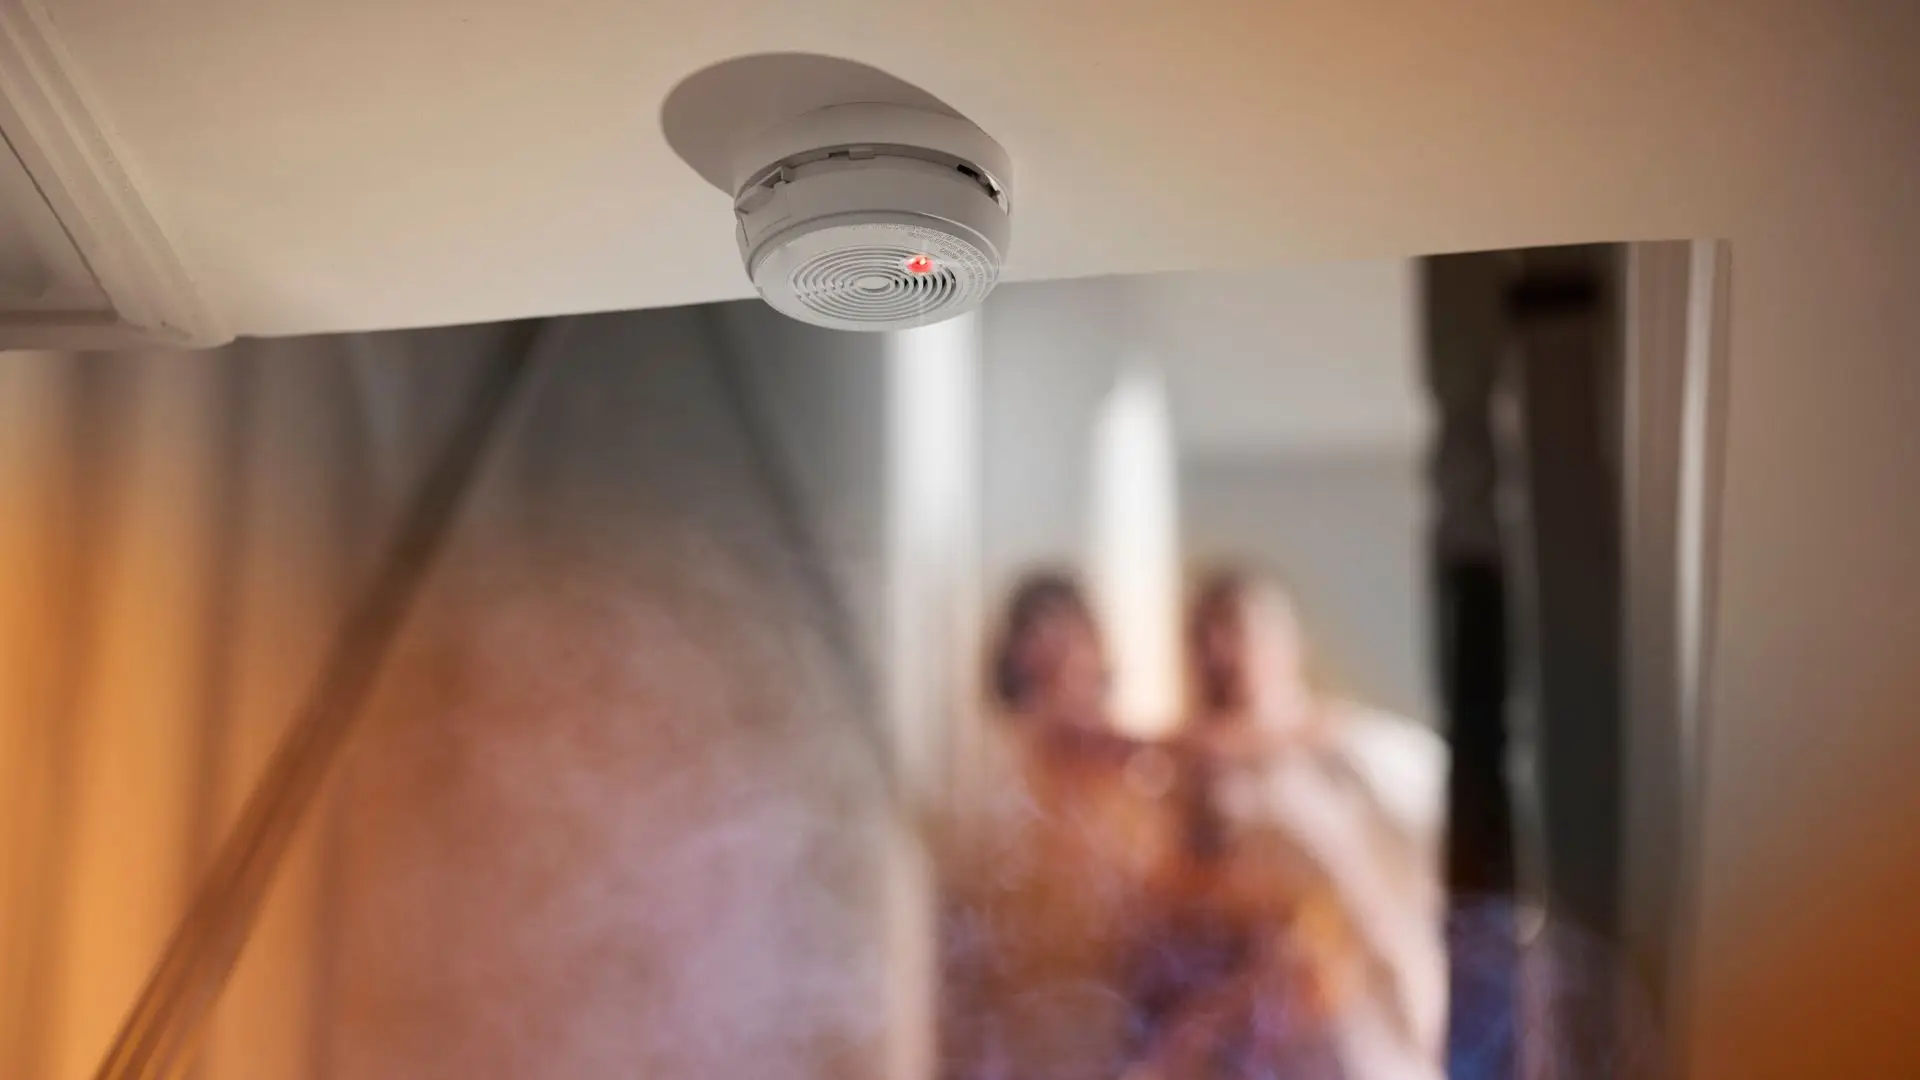 Alarm Protection Services smoke detector with red light and smoke visible in a home